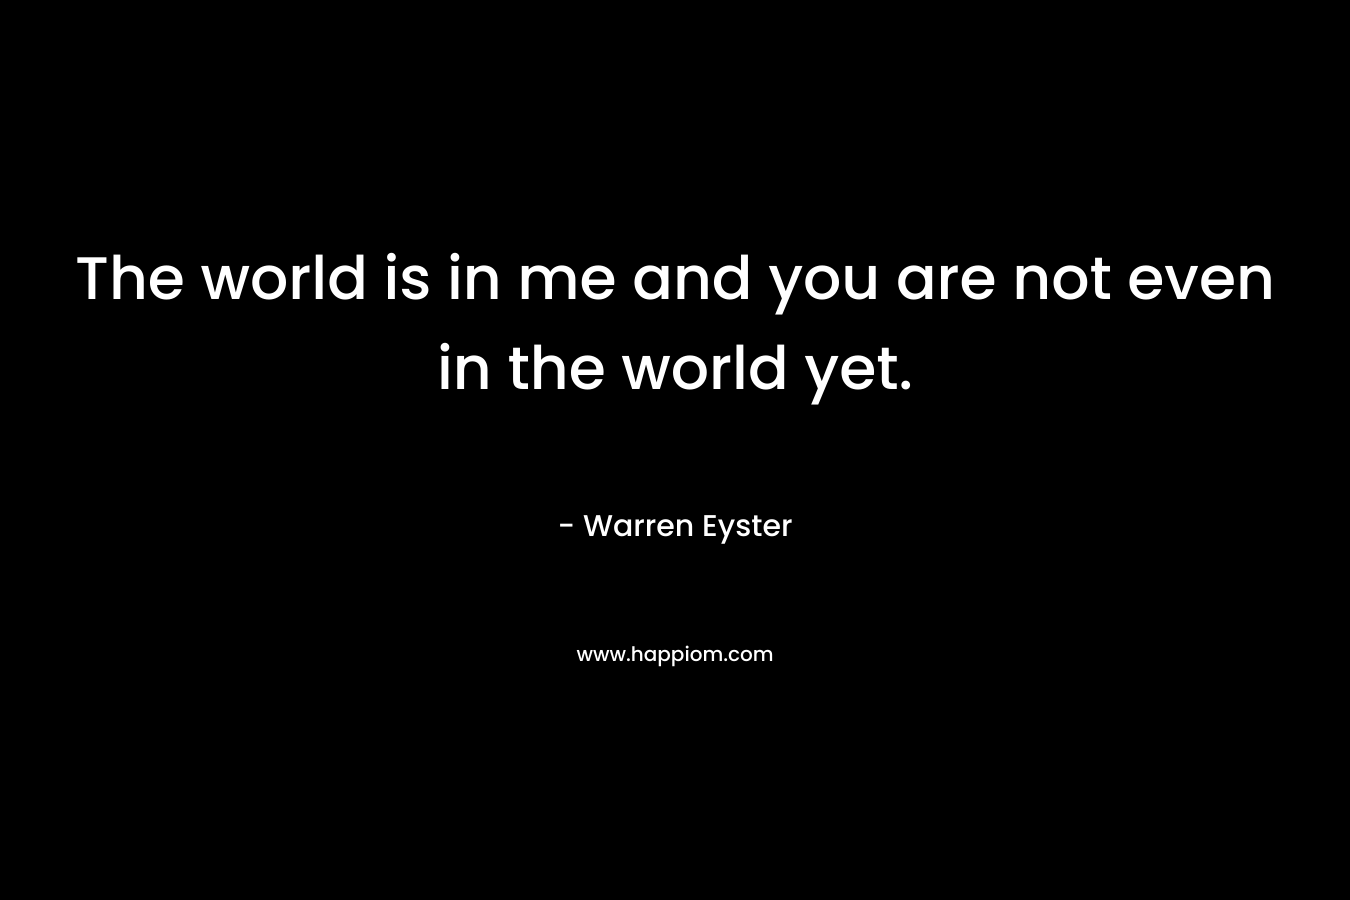 The world is in me and you are not even in the world yet. – Warren Eyster